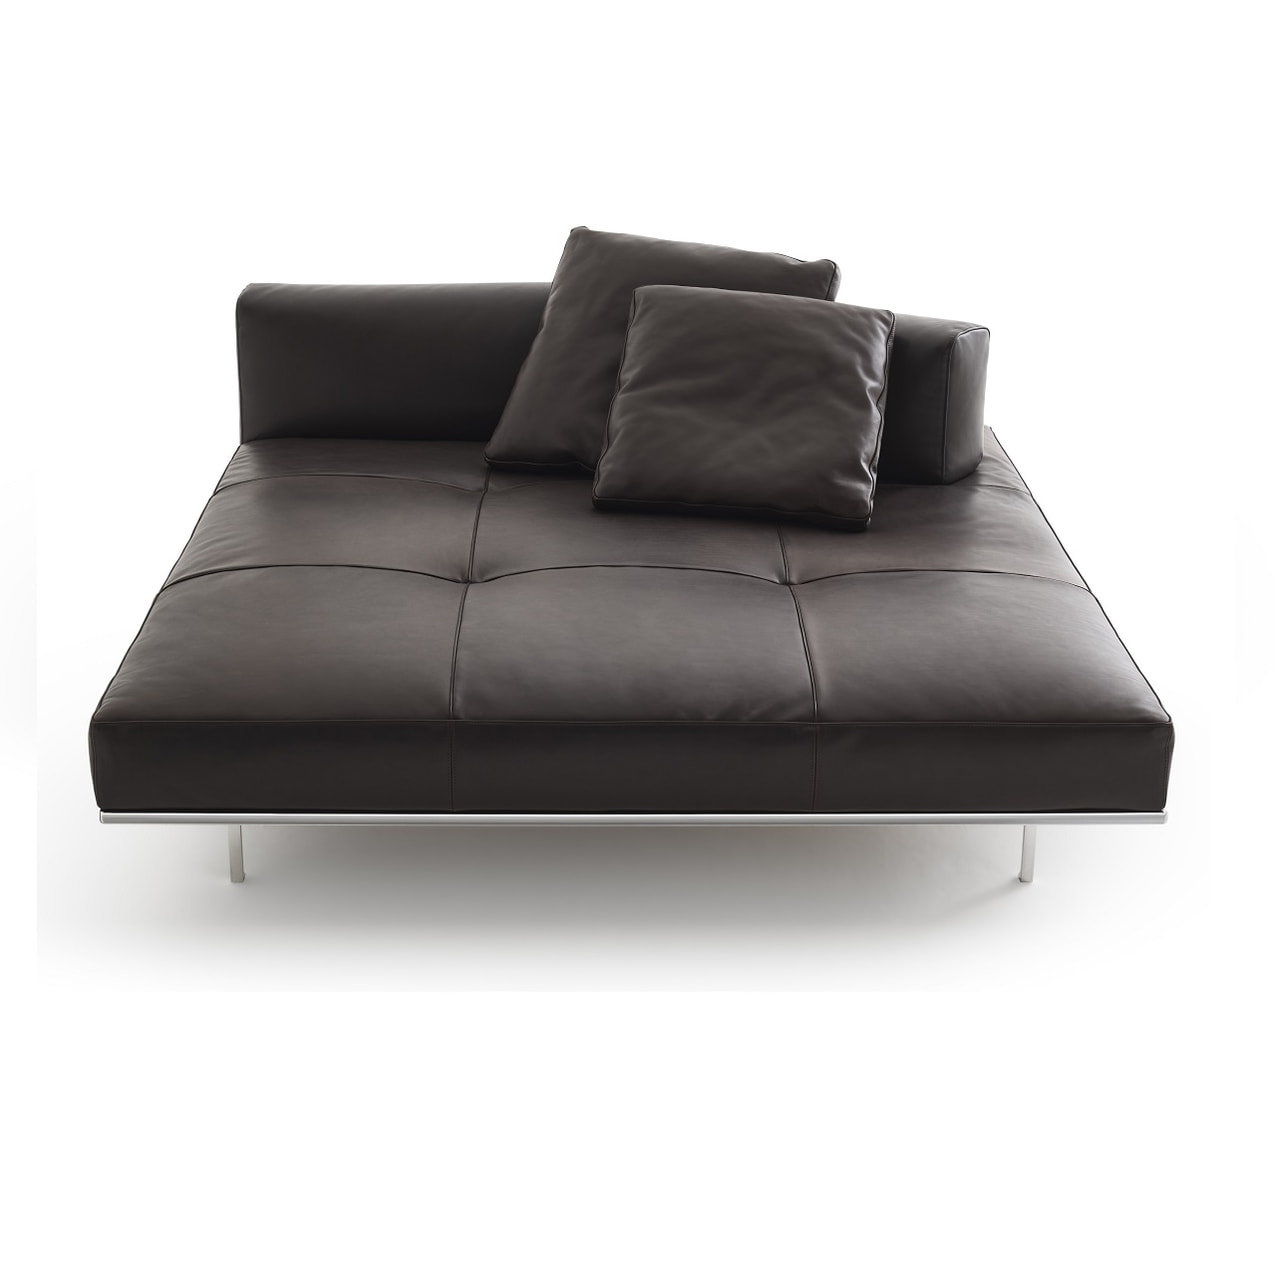 Piero Lissoni Collection Matic Chaise Longue Free Standing